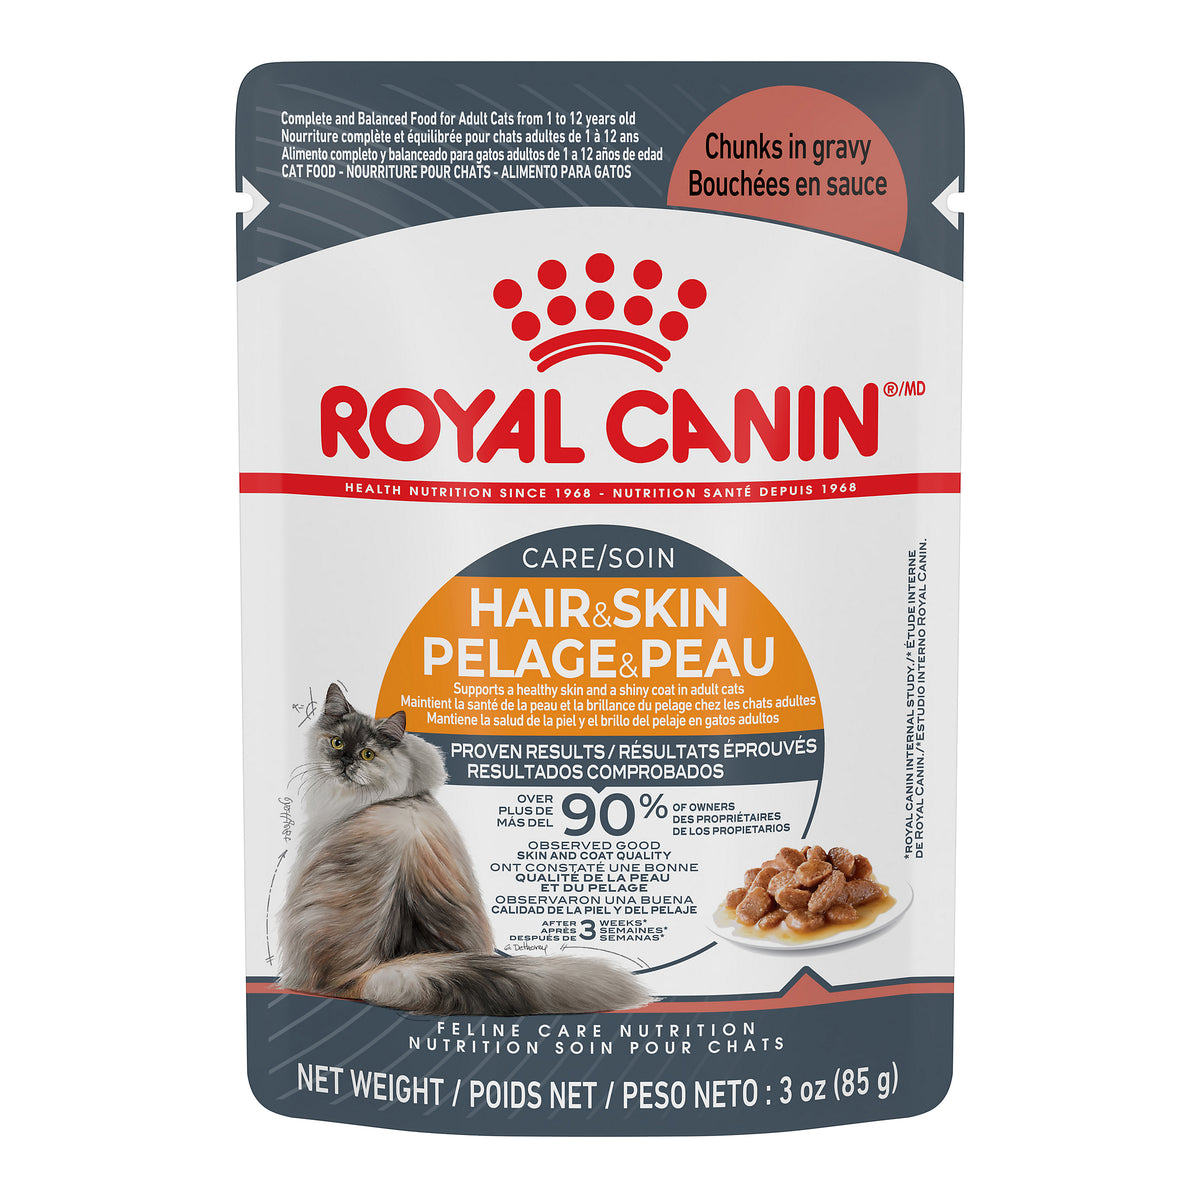 Royal Canin Intense Beauty Chunks in Gravy - Pouch Cat Food (85g)